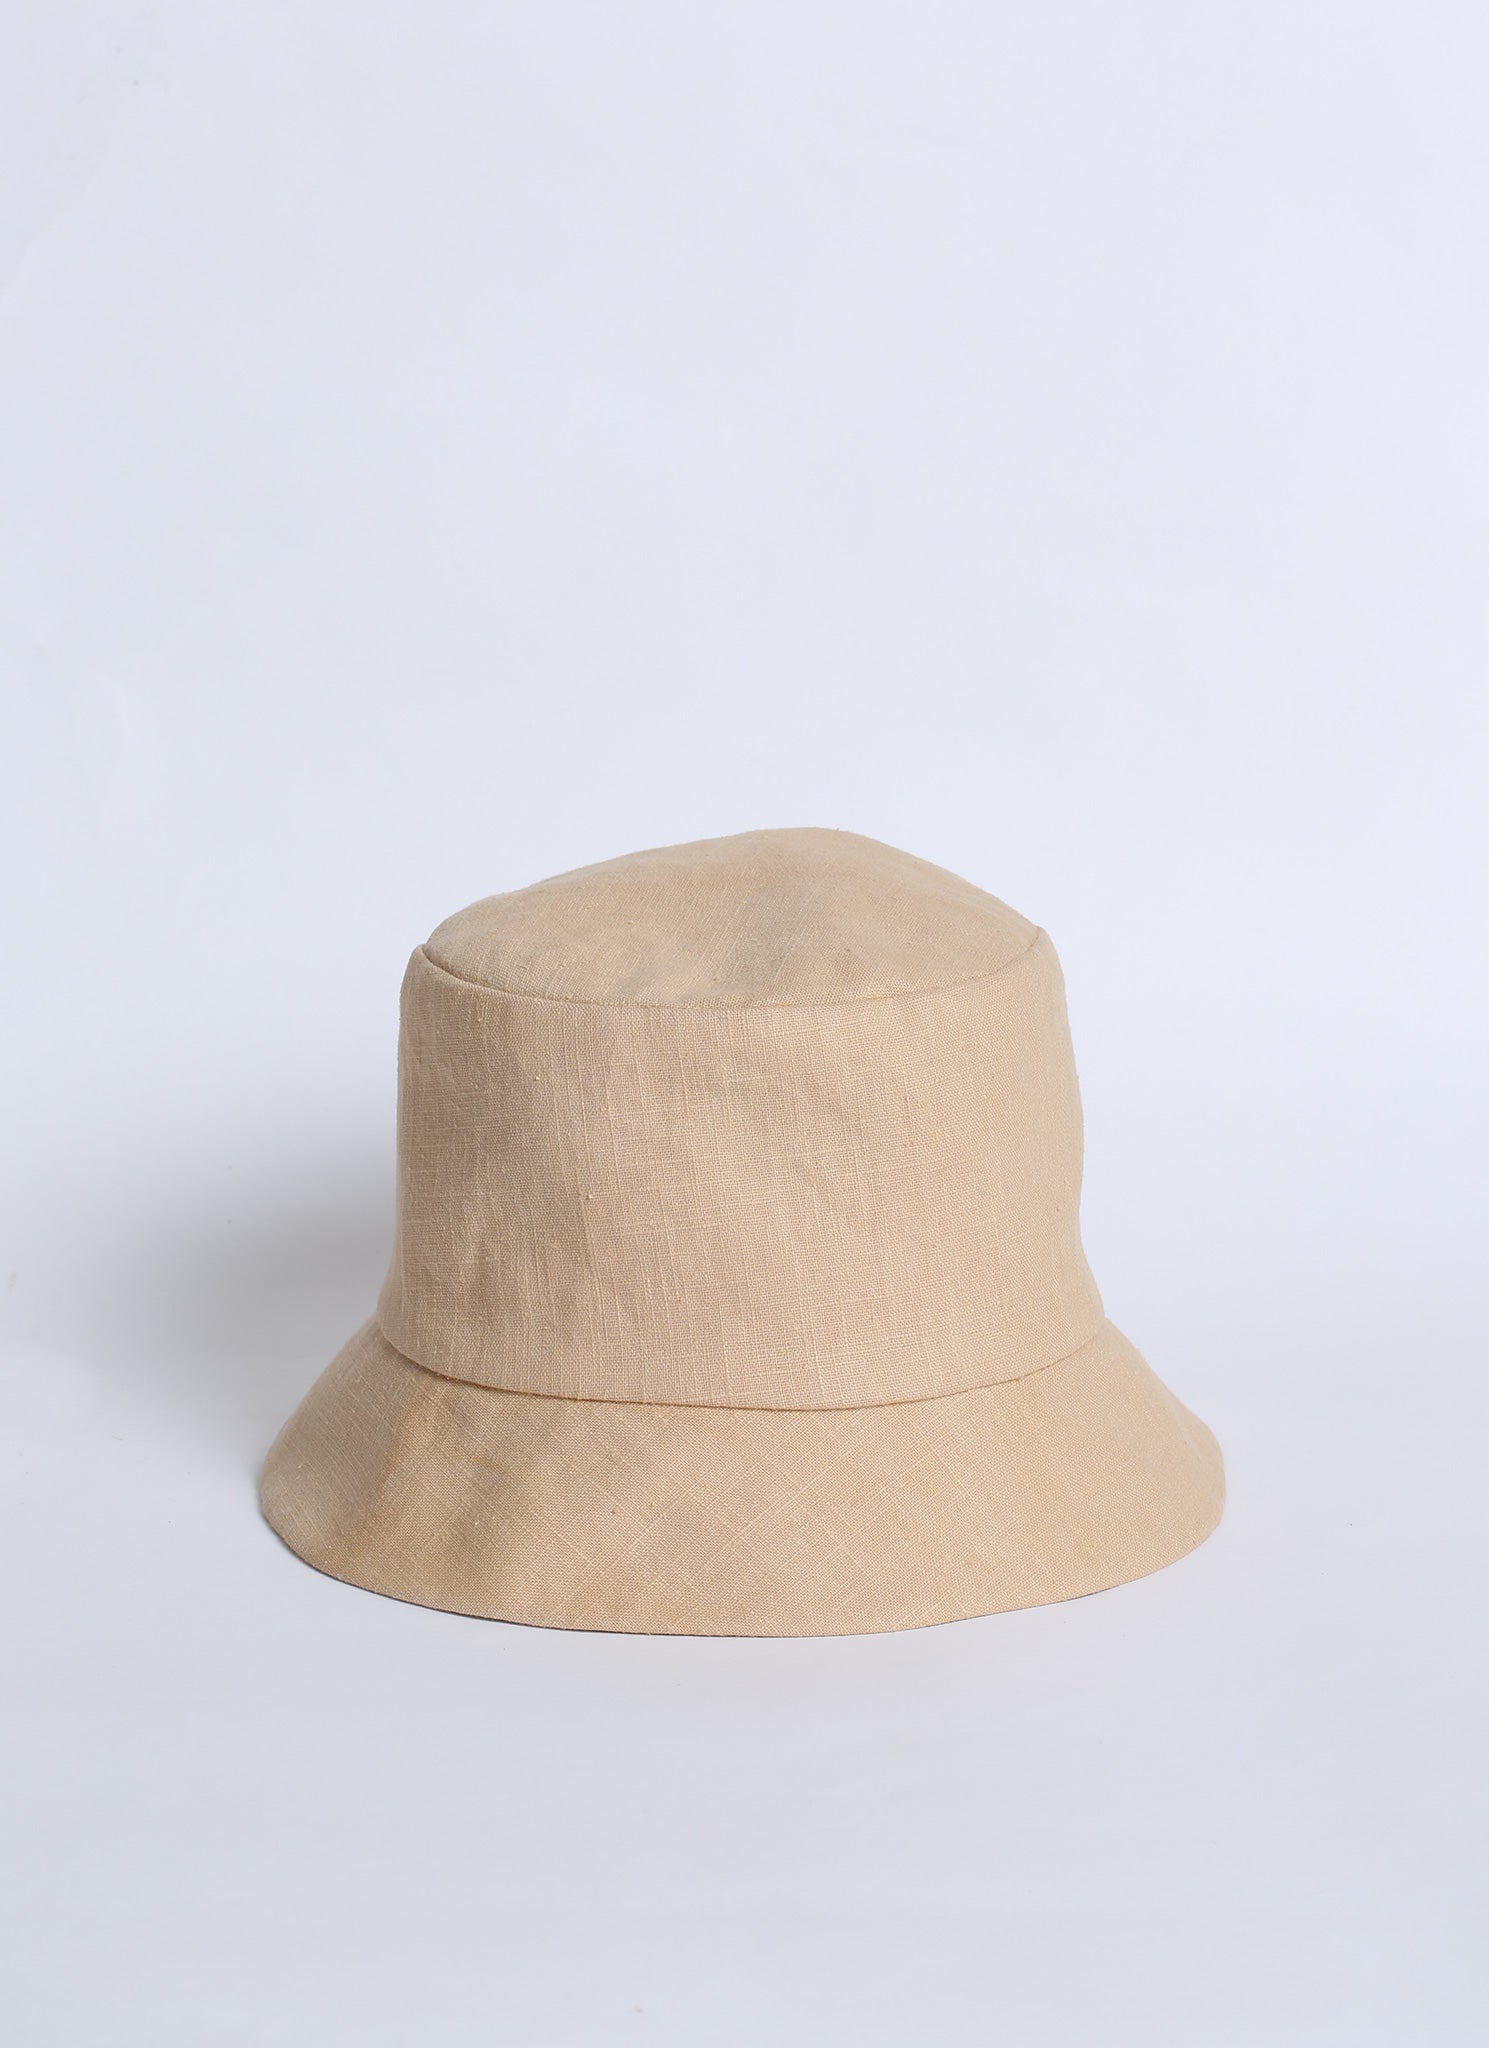 Cameo Pigment Dyed Bucket Hat